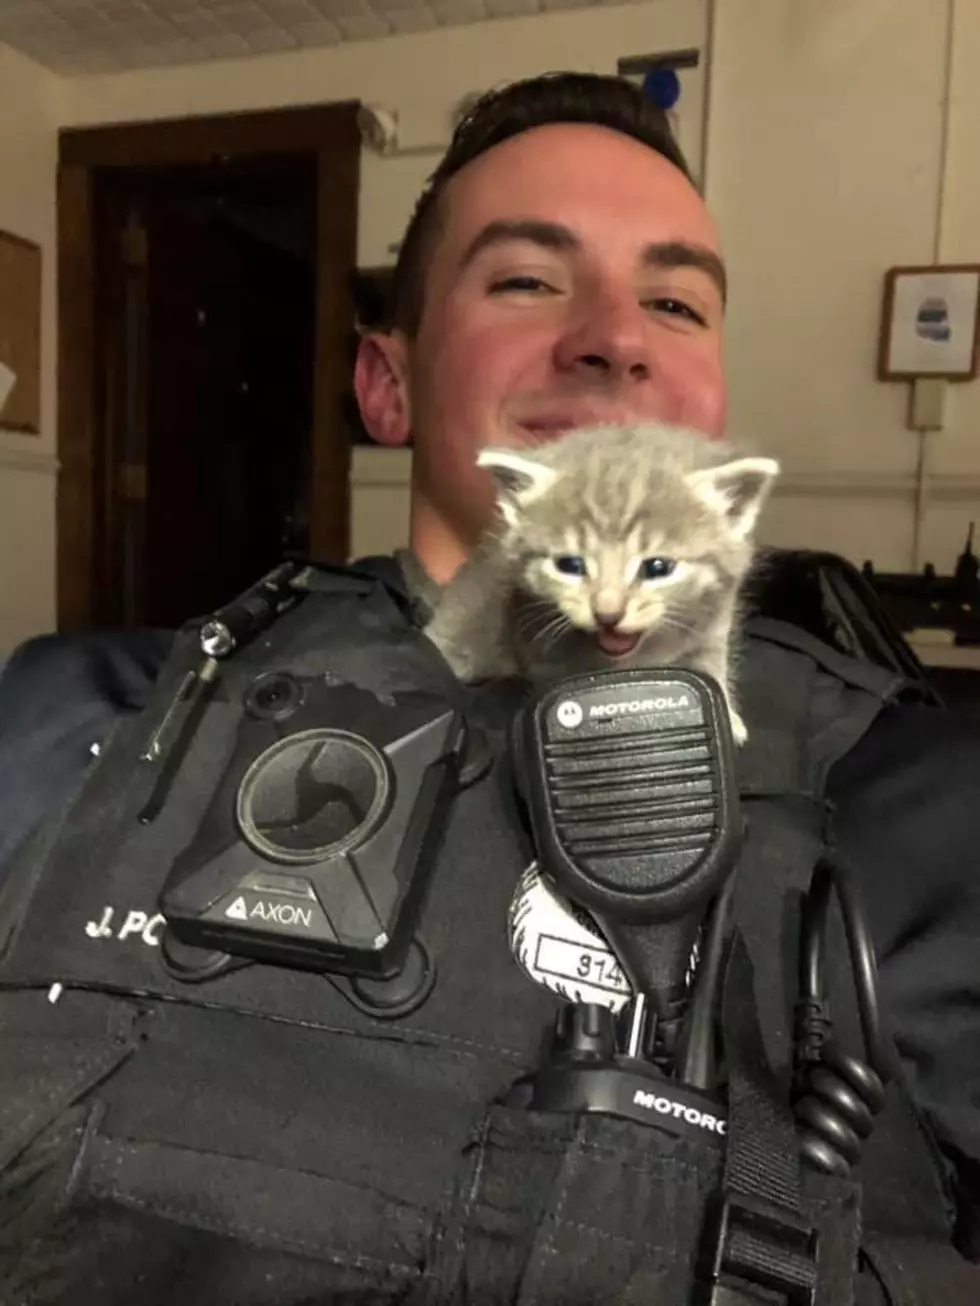 Cat Badge Fever: Cute Photo Of Albany Cop w Kittens Goes Viral